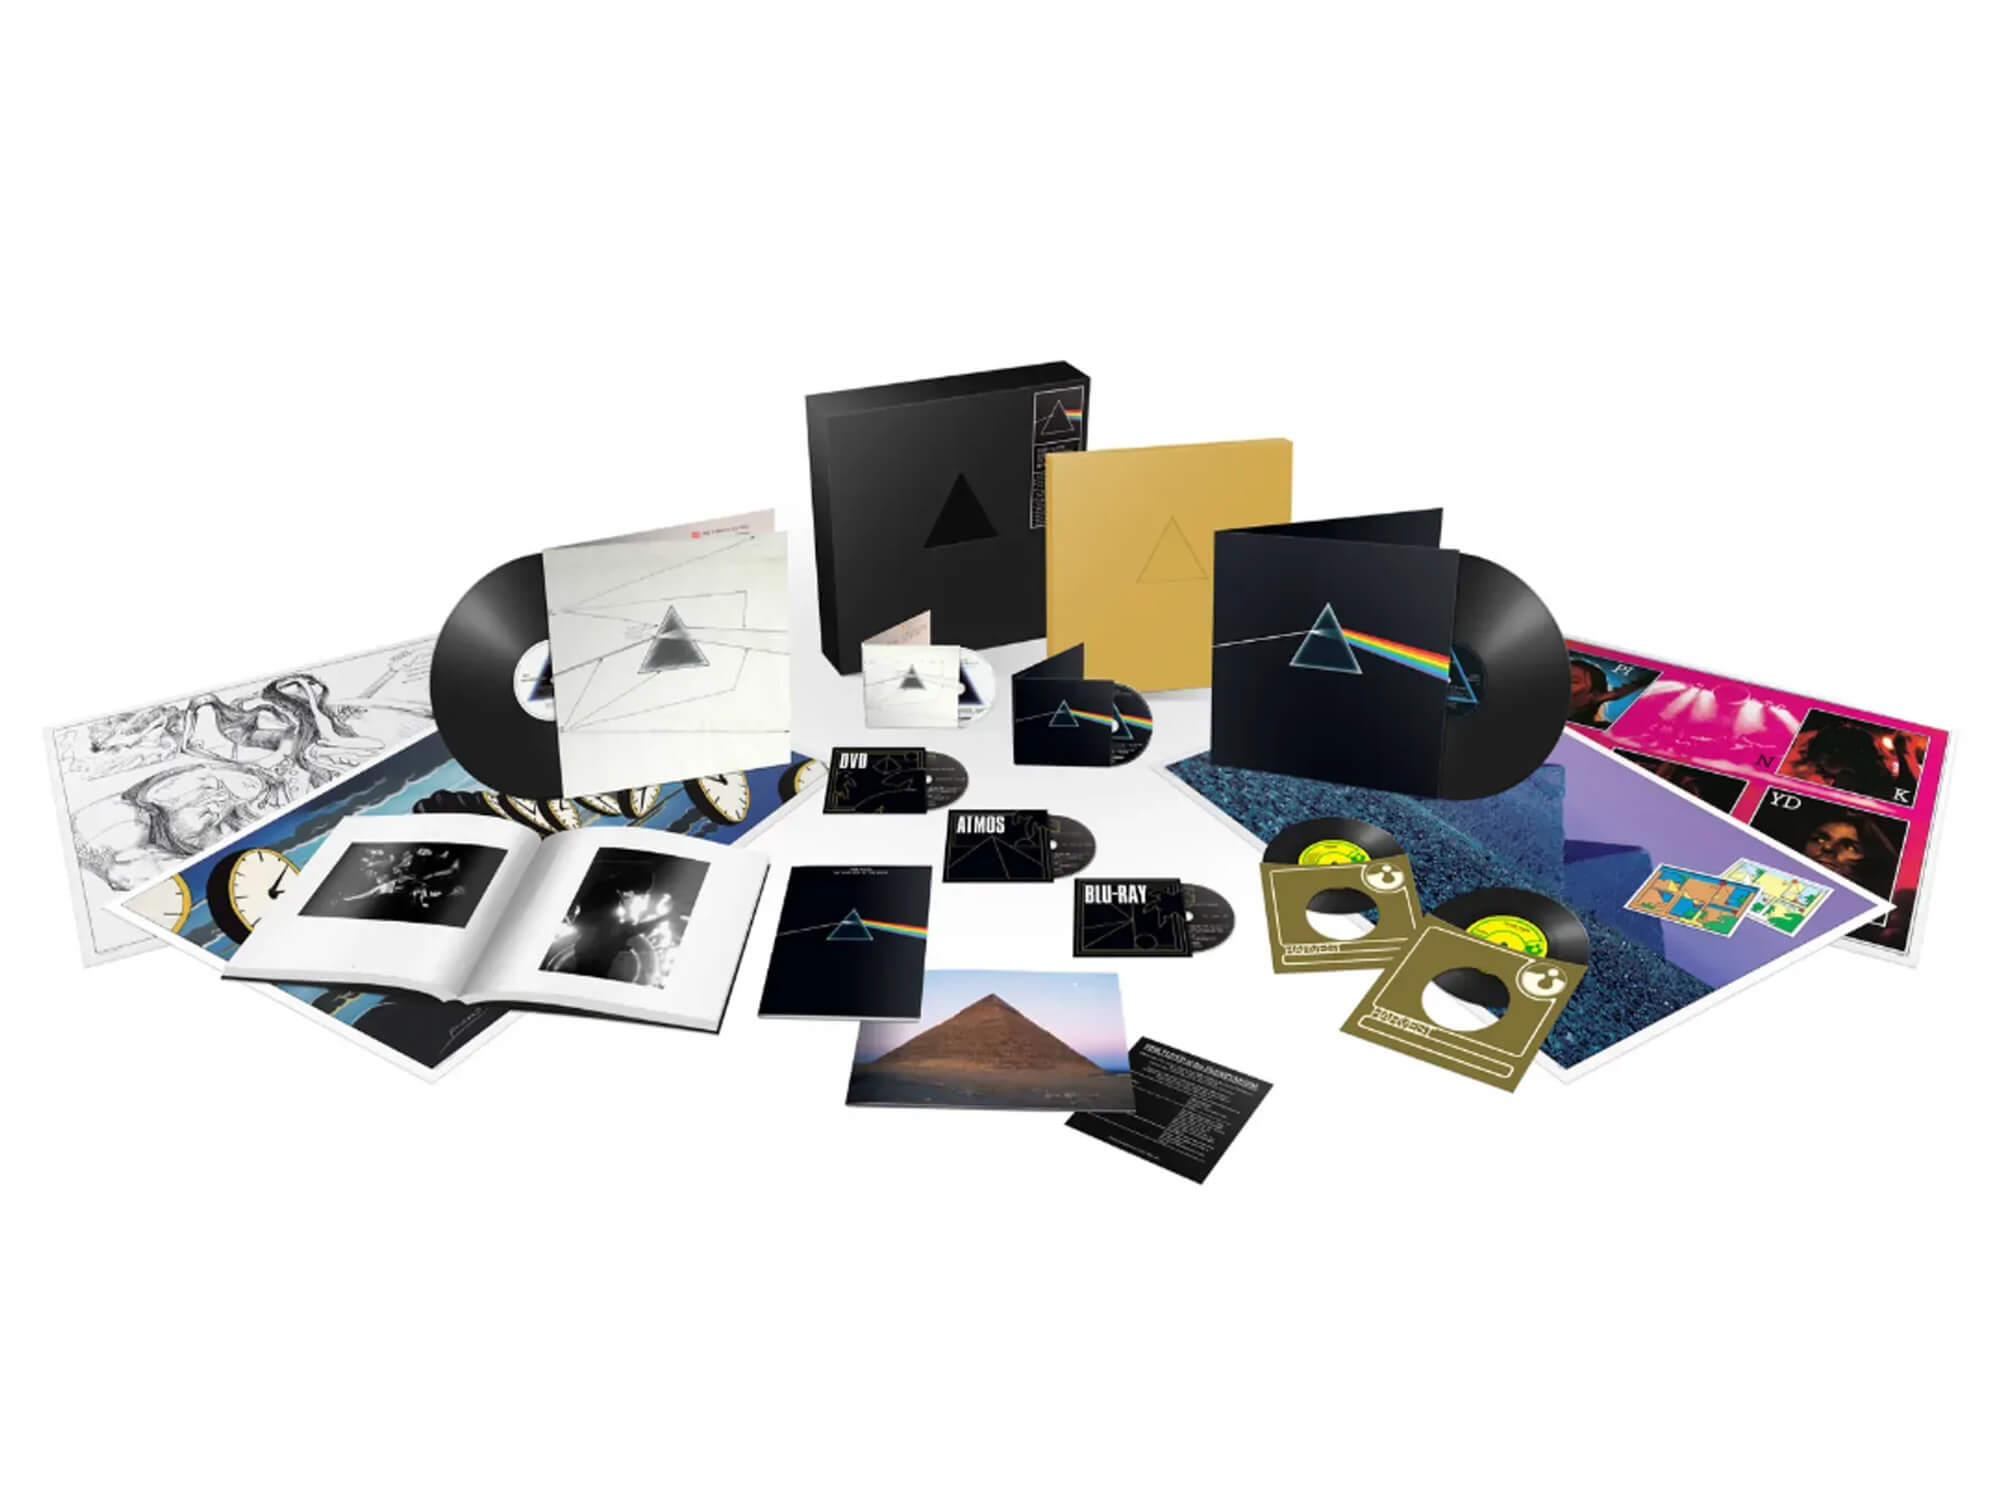 Pink Floyd's The Dark Side Of The Moon box set